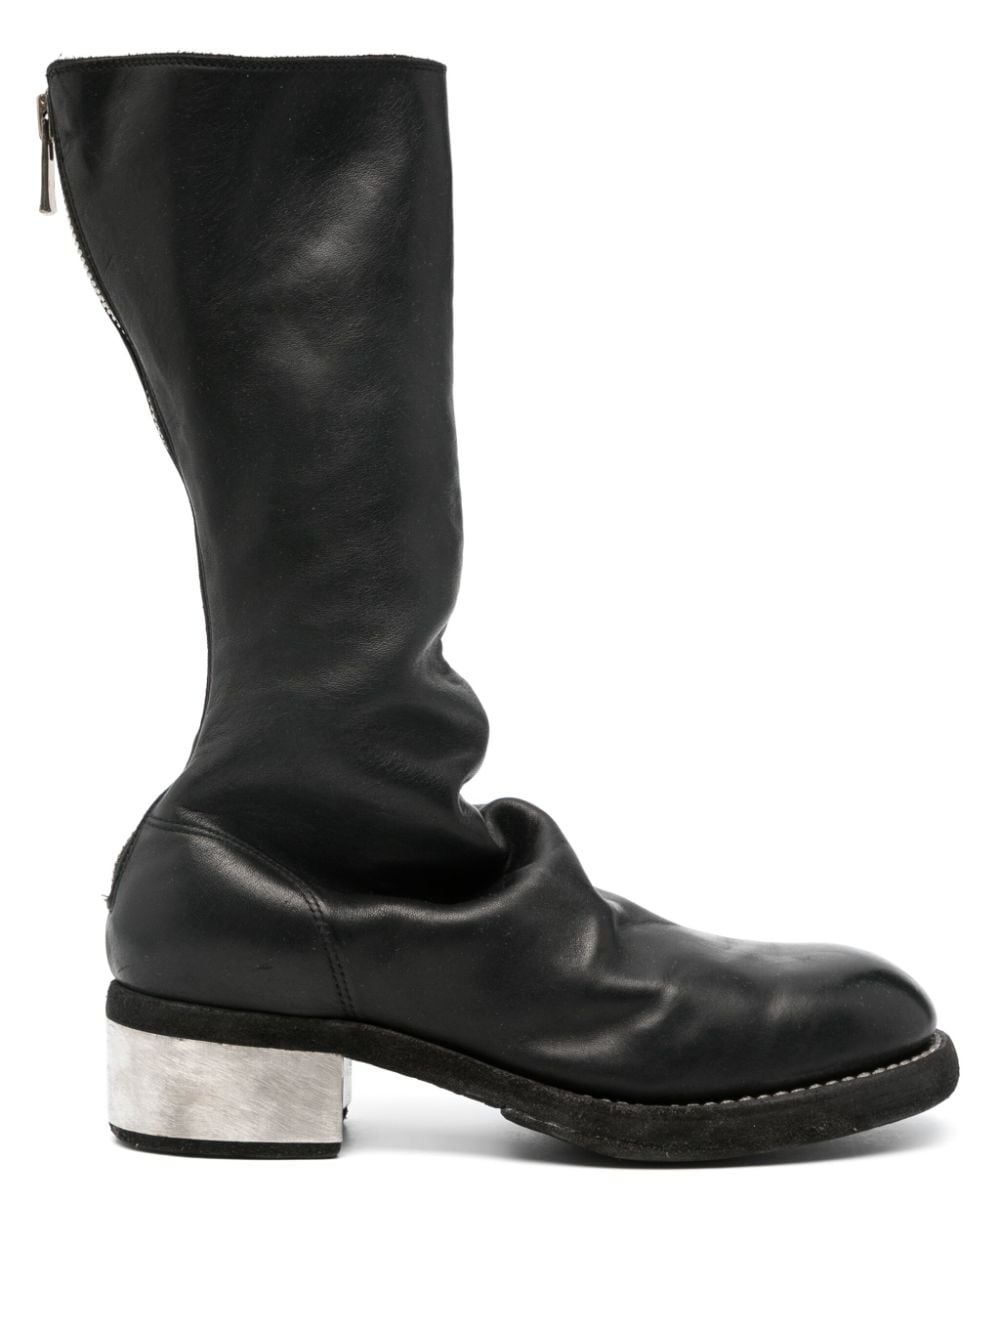 45mm leather boots - 1